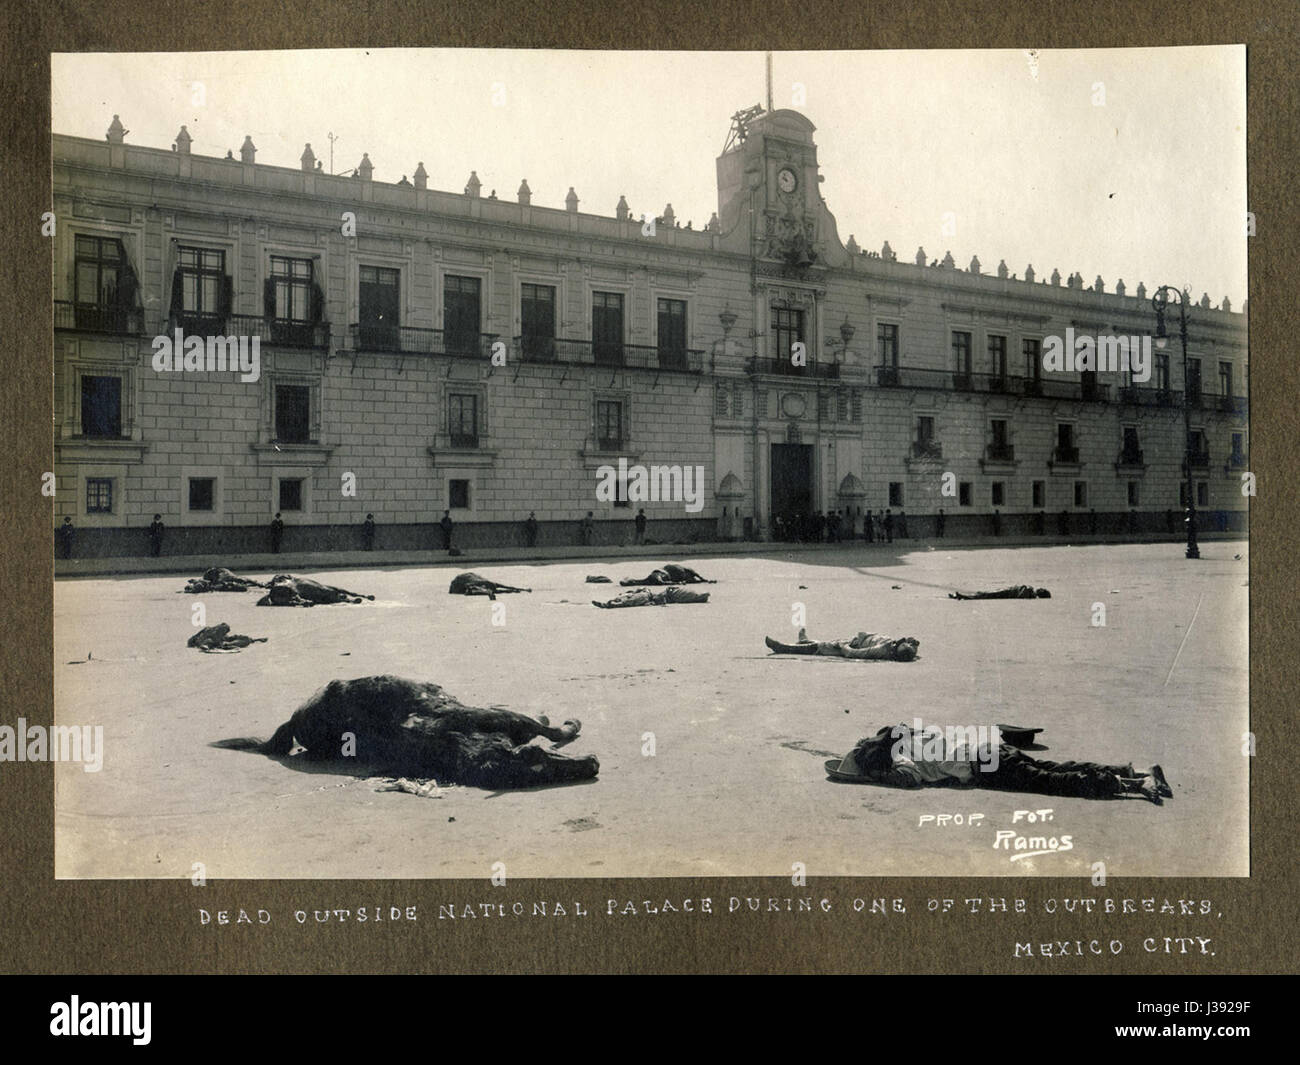 Dead outside National Palace during one of the outbreaks, Mexico City Stock Photo